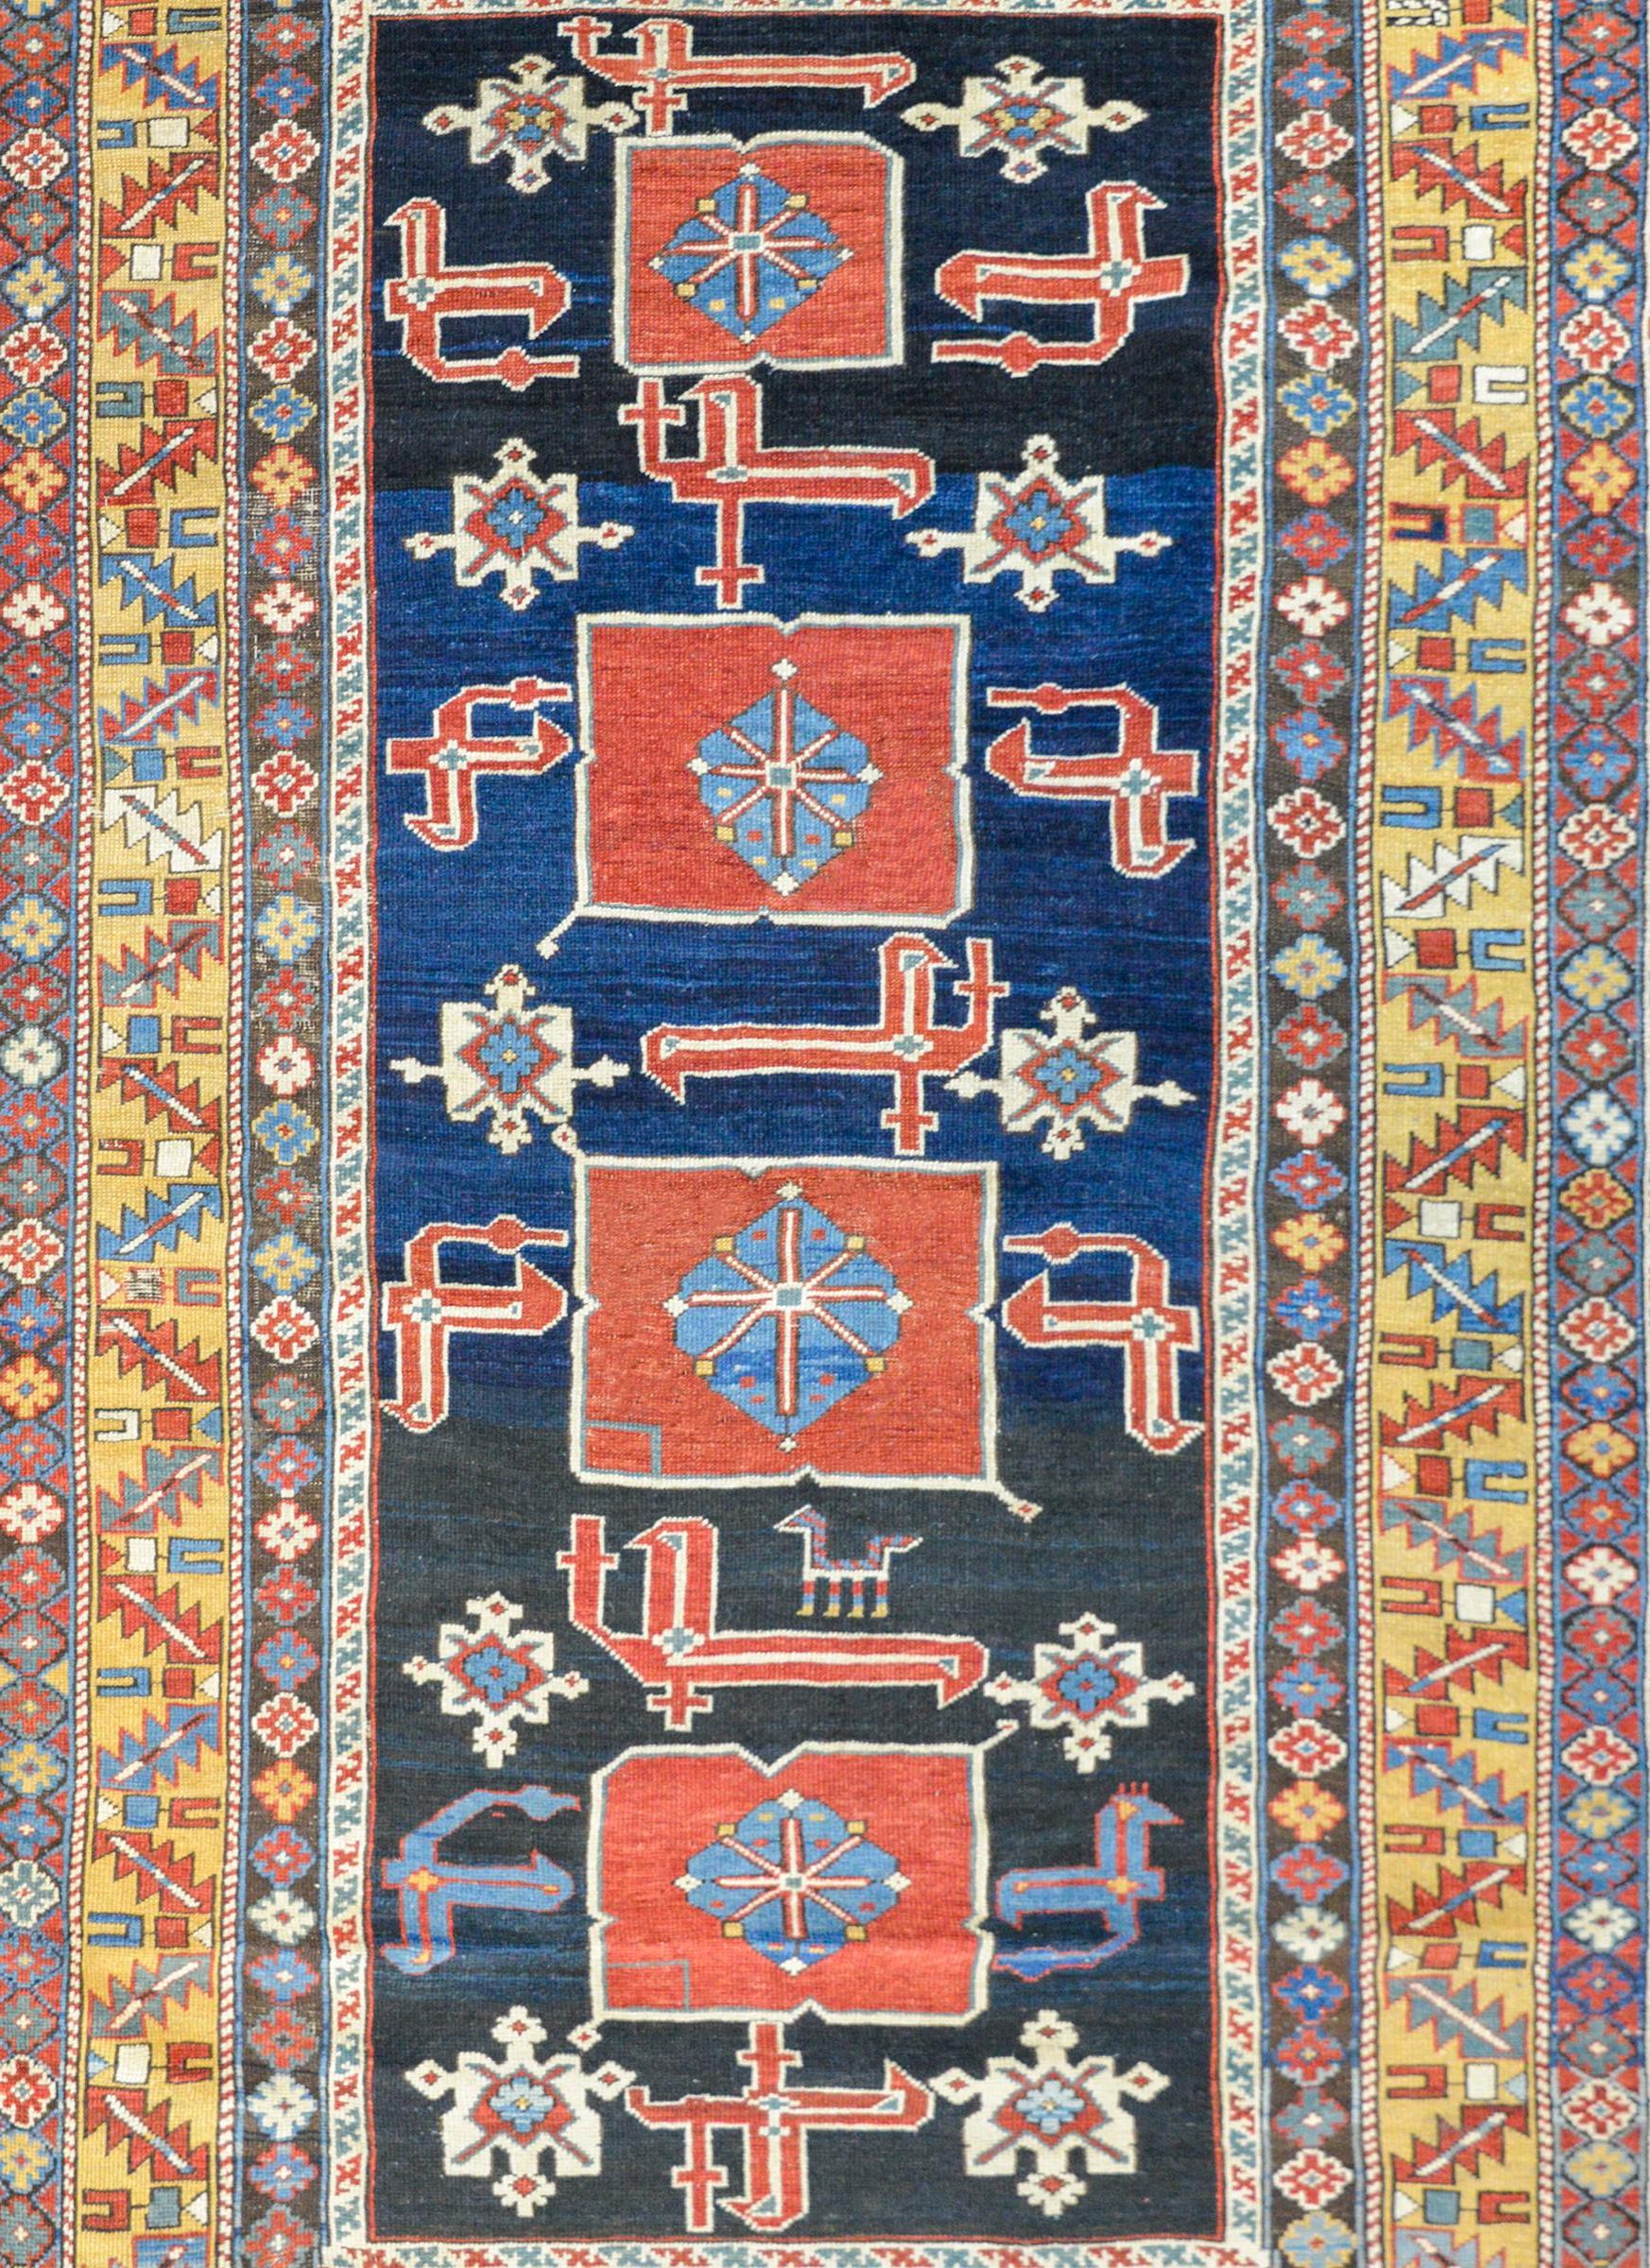 An outstanding early 20th century Azerbaijani Kazak rug with a bold pattern containing four large crimson medallions amidst a field of stylized flowers and scrolling vines on a beautiful rich dark Abrash indigo background. The border is exceptional